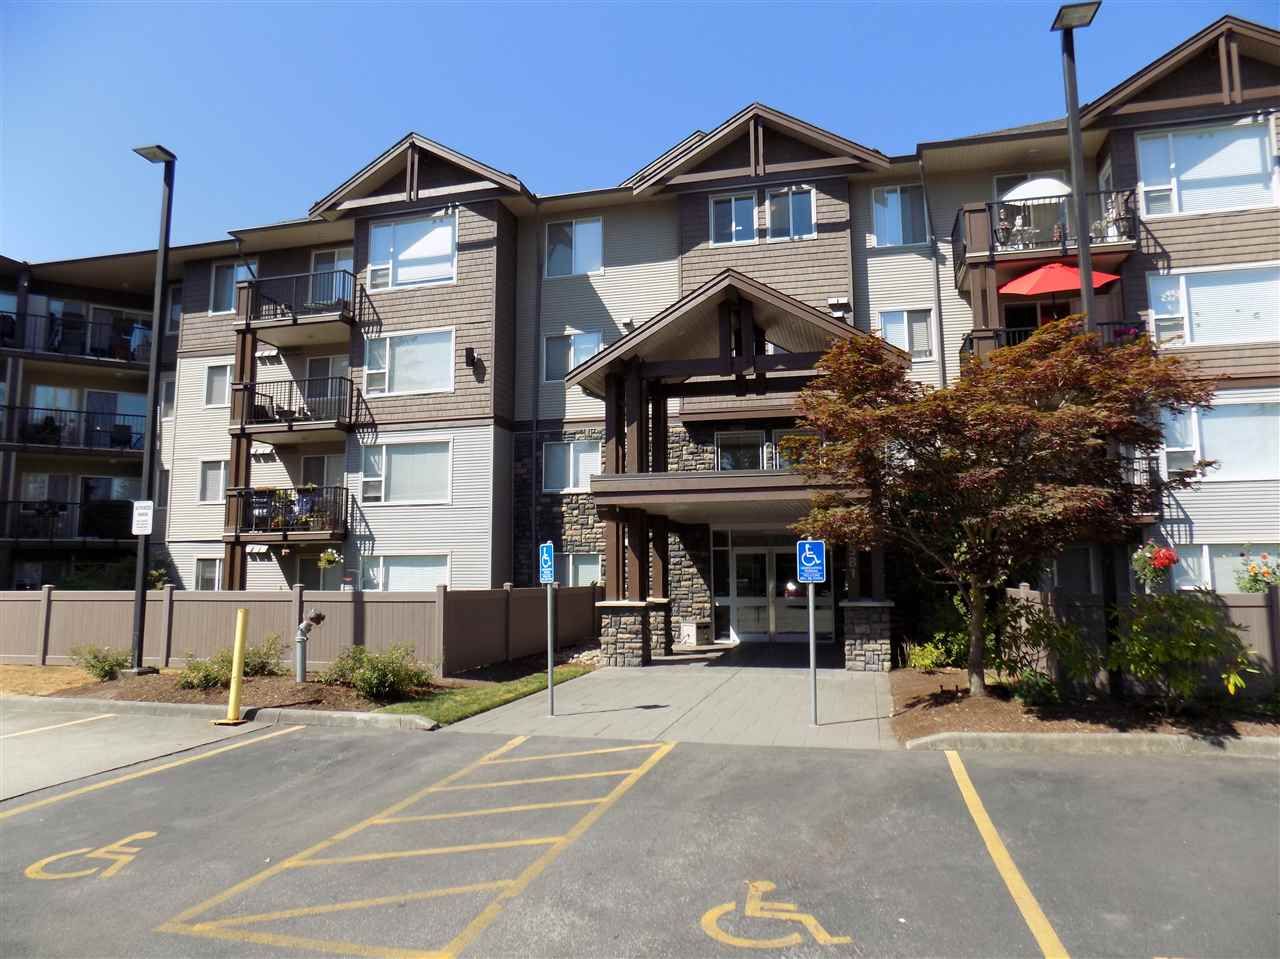 The Lal's have sold a property at 204 2581 LANGDON ST in Abbotsford